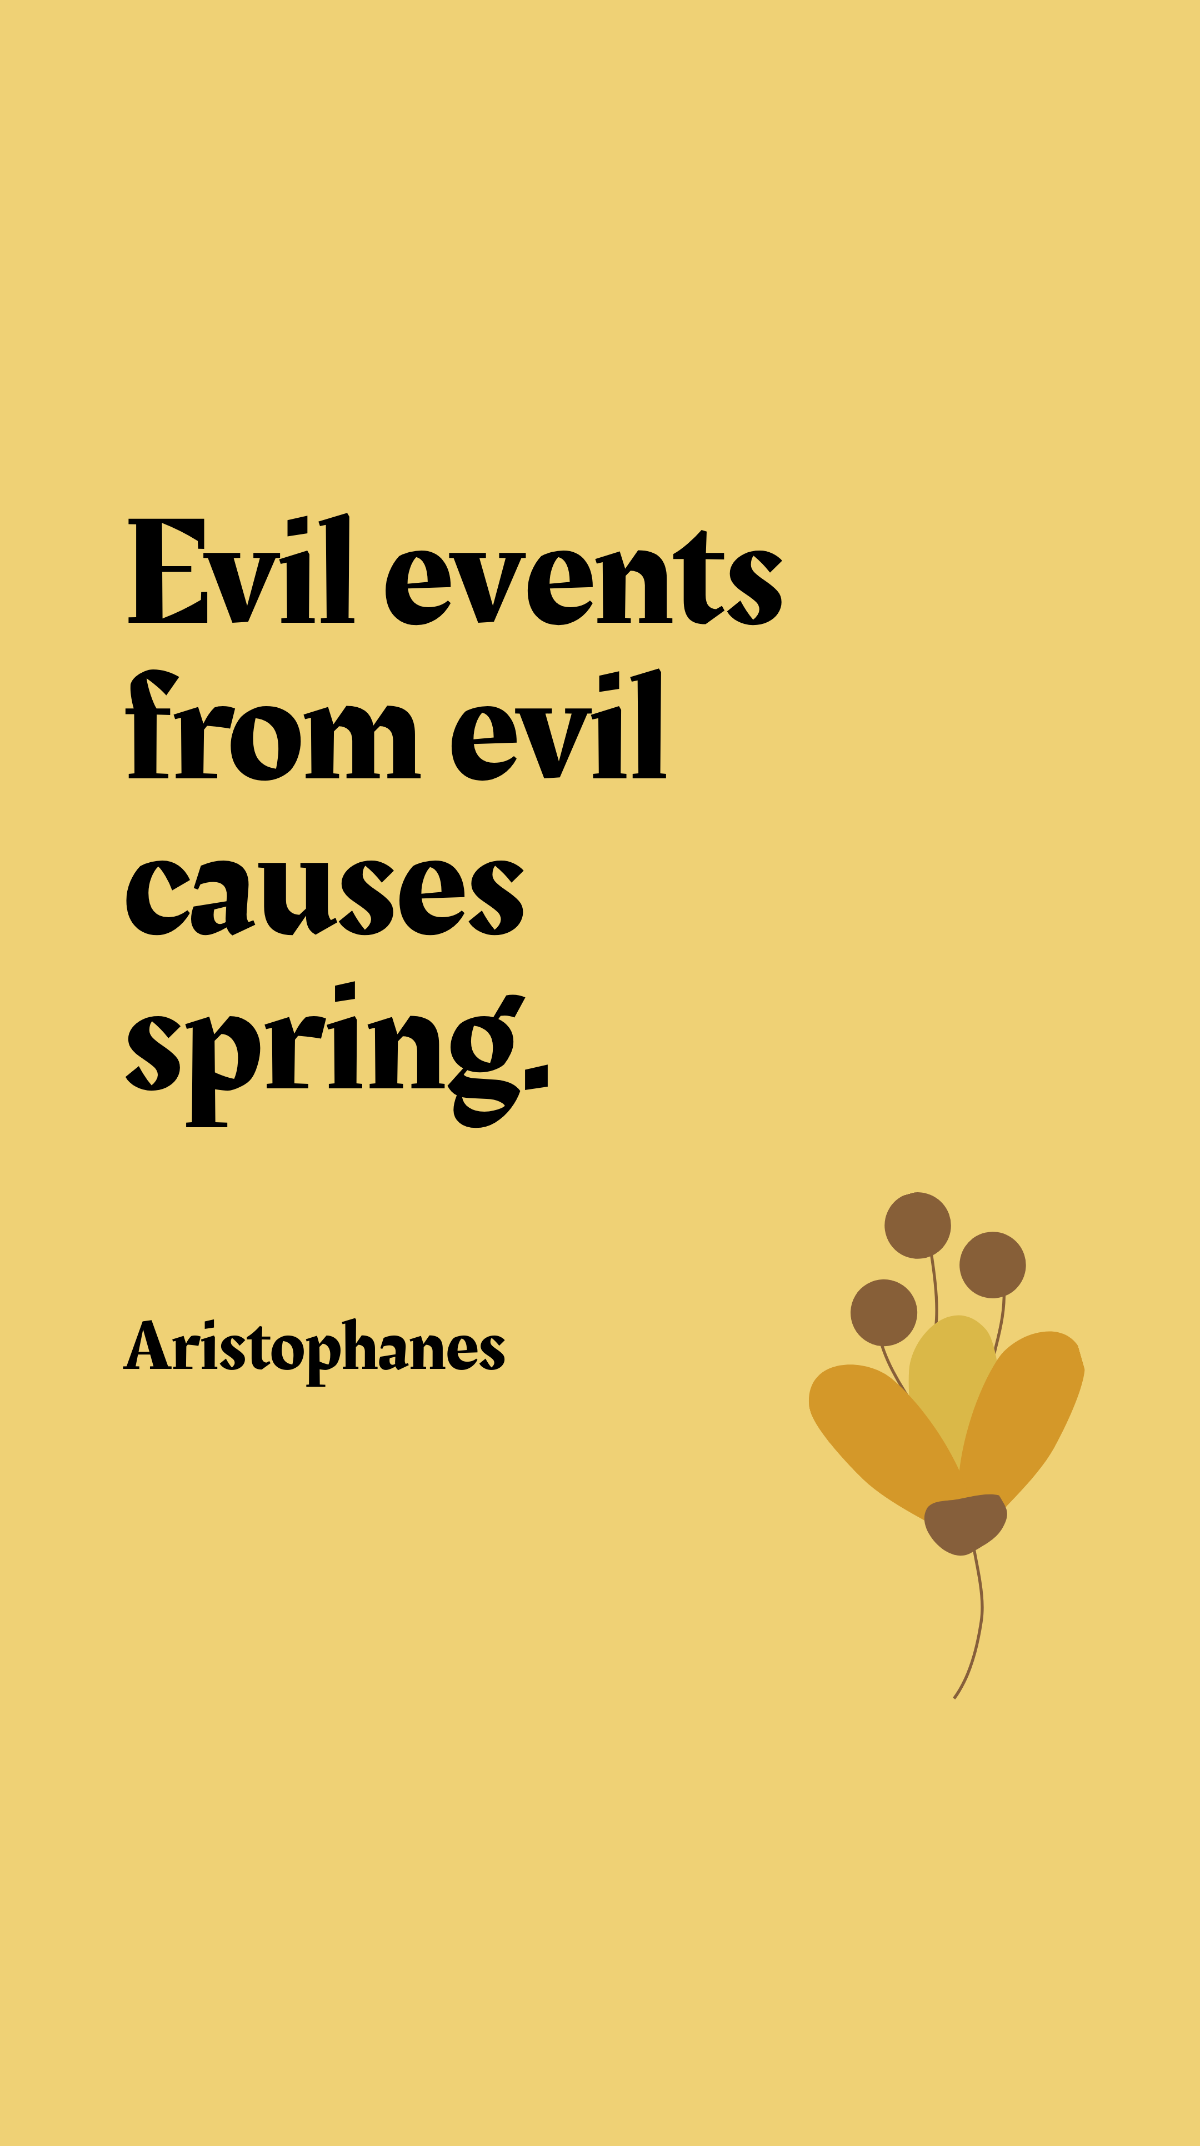 Aristophanes - Evil events from evil causes spring.